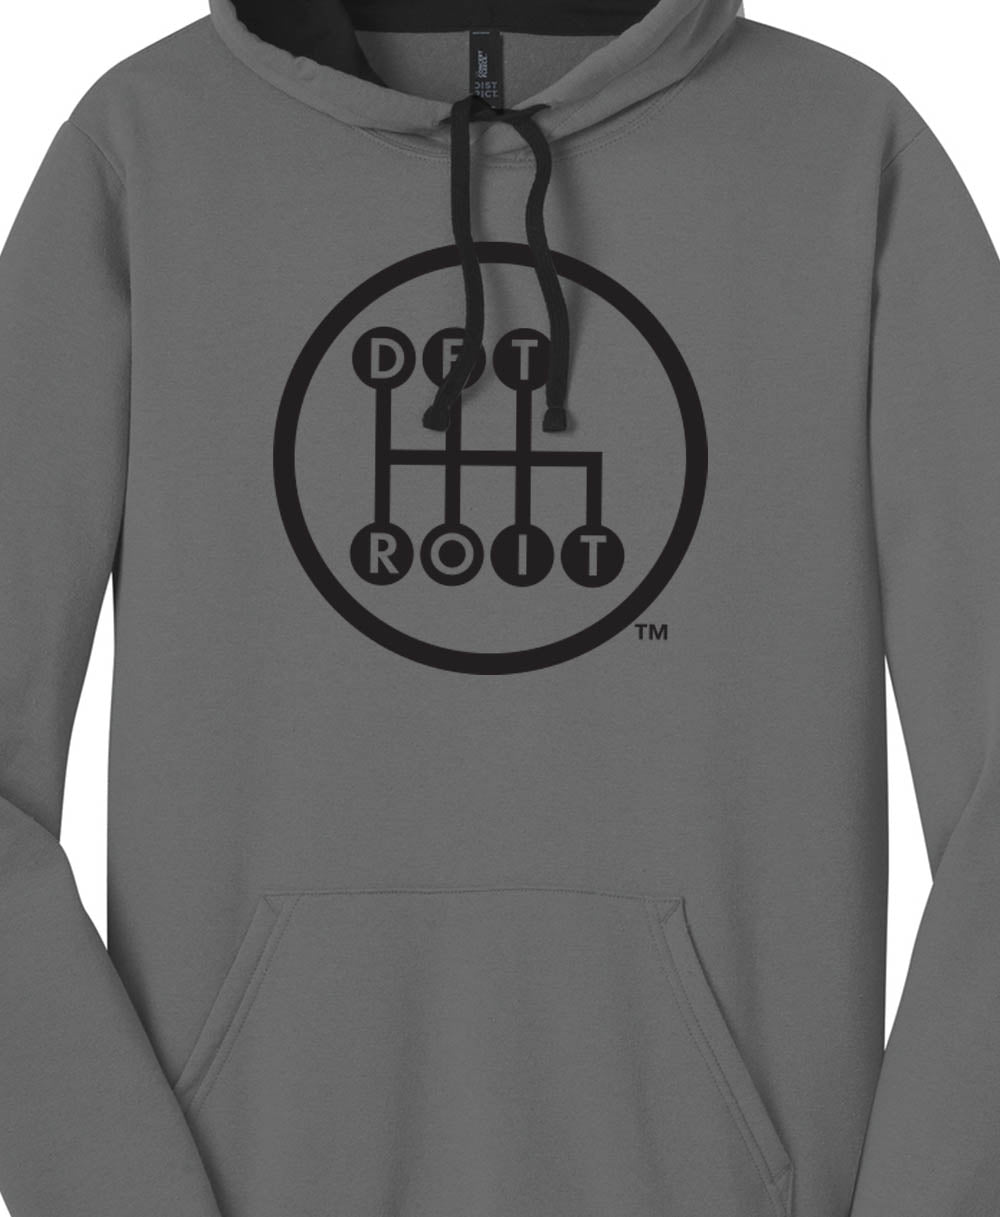 Detroit Shifter design printed in black on gray hoodie with black lined hood.